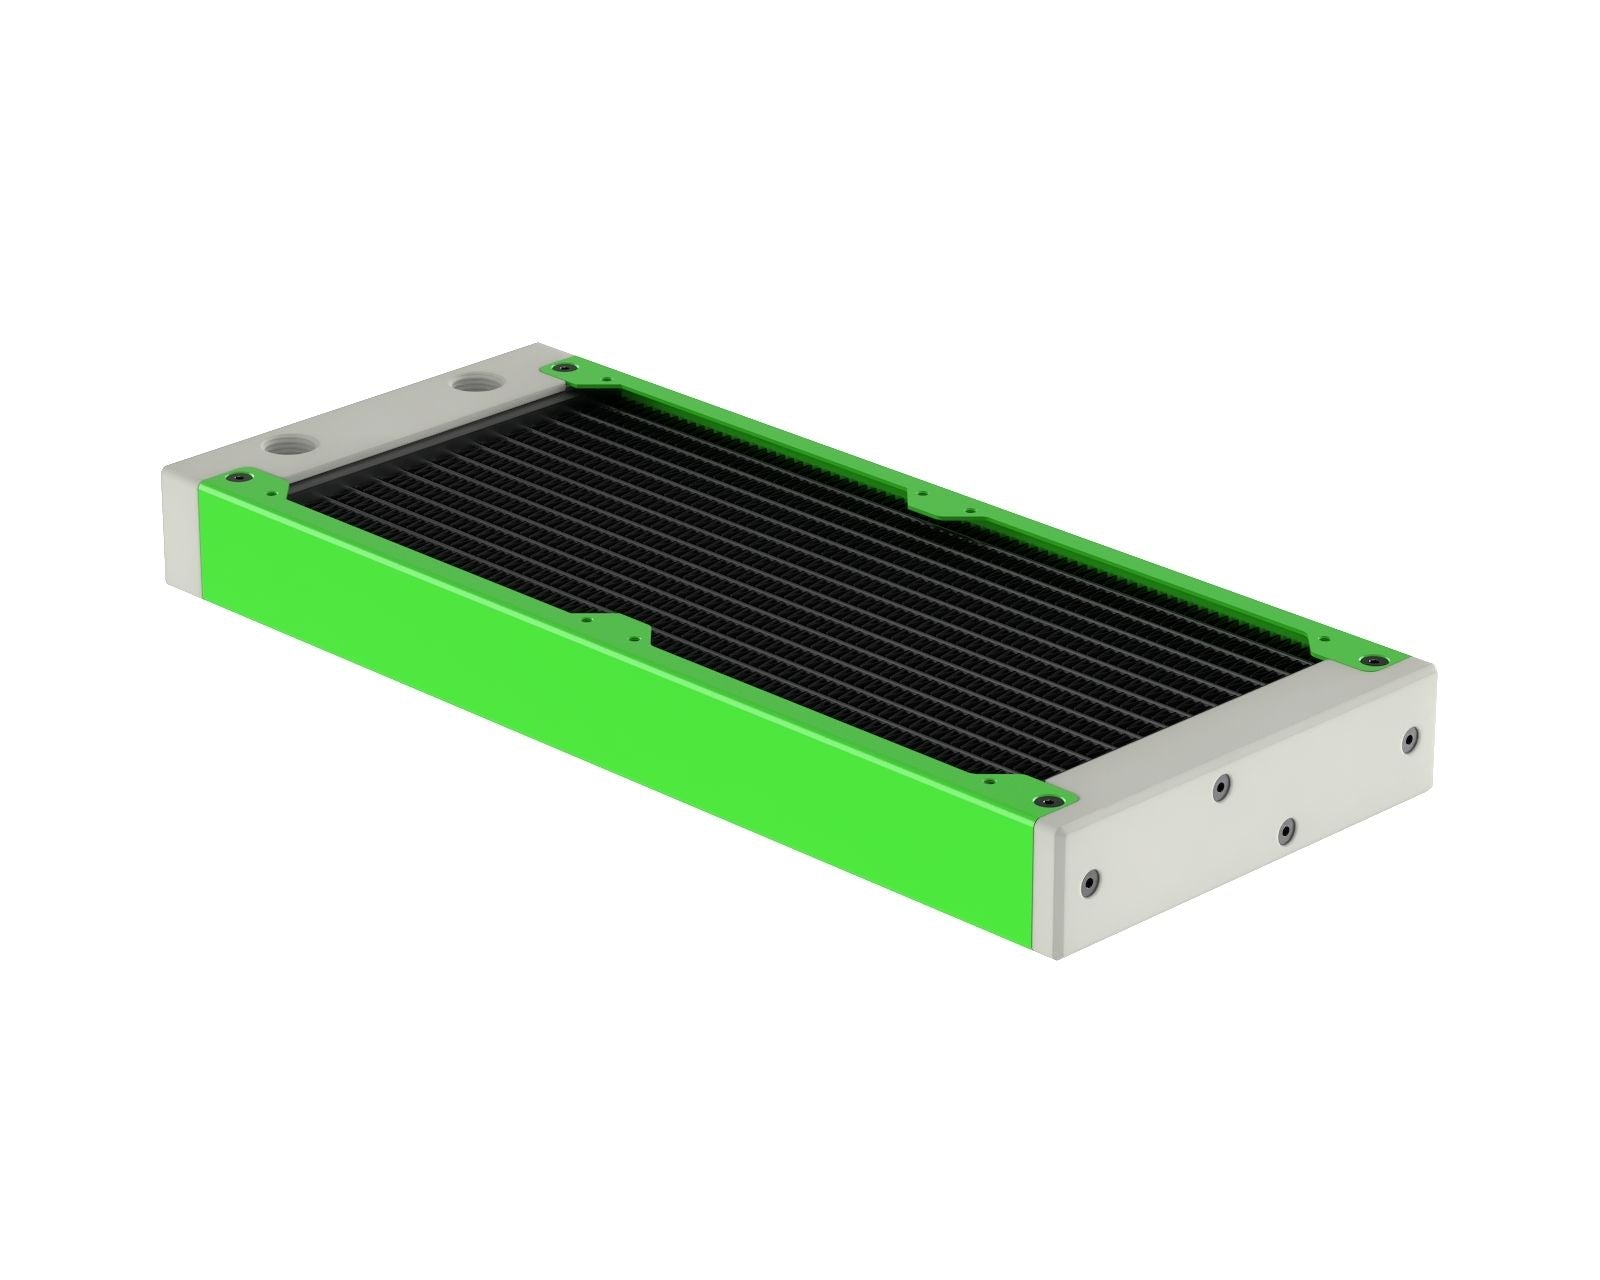 PrimoChill 240SL (30mm) EXIMO Modular Radiator, White POM, 2x120mm, Dual Fan (R-SL-W24) Available in 20+ Colors, Assembled in USA and Custom Watercooling Loop Ready - UV Green